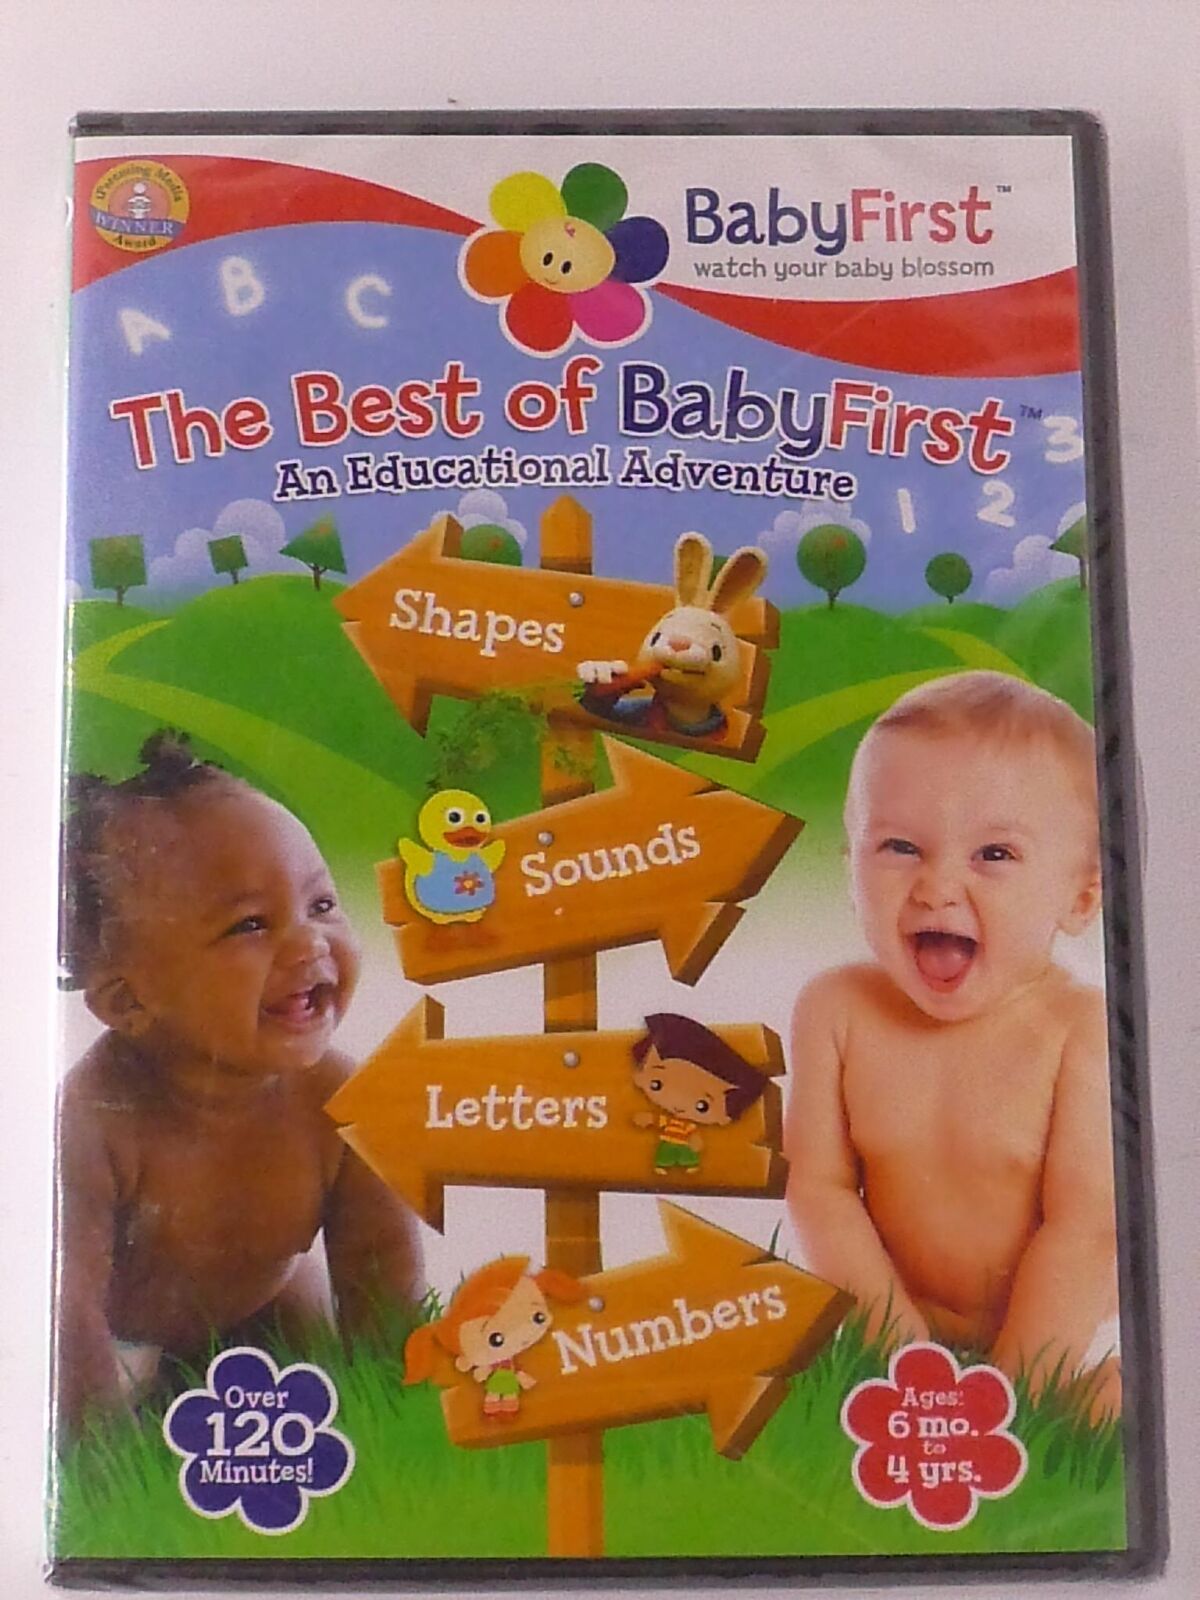 The Best of BabyFirst - An Educational Adventure (DVD) - NEW23